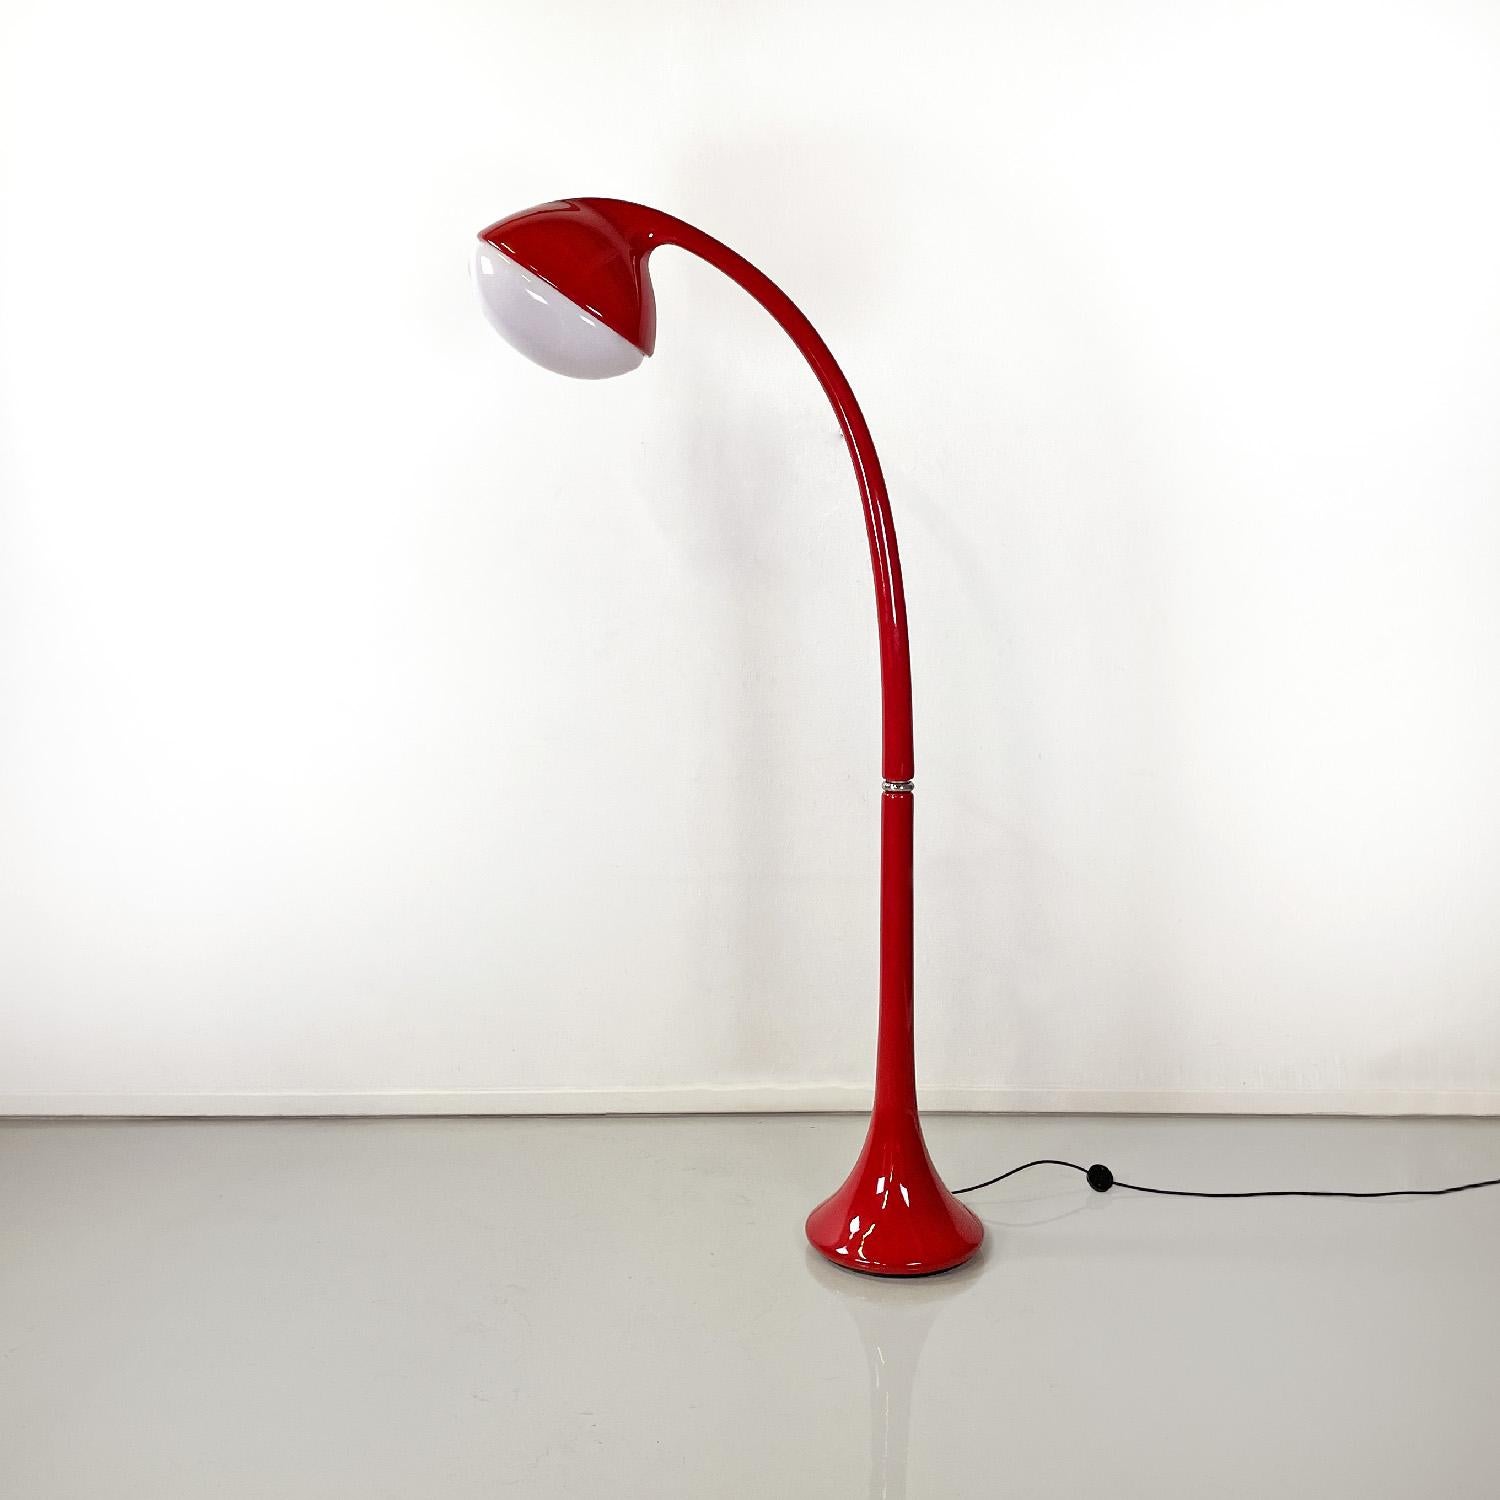 Italian modern red floor lamp Lampione by Fabio Lenci for Guzzini, 1970s
Floor lamp mod. Lampione with a round base in metal and red polyurethane. The structure is composed of a central stem with a round section which curves in the upper part,